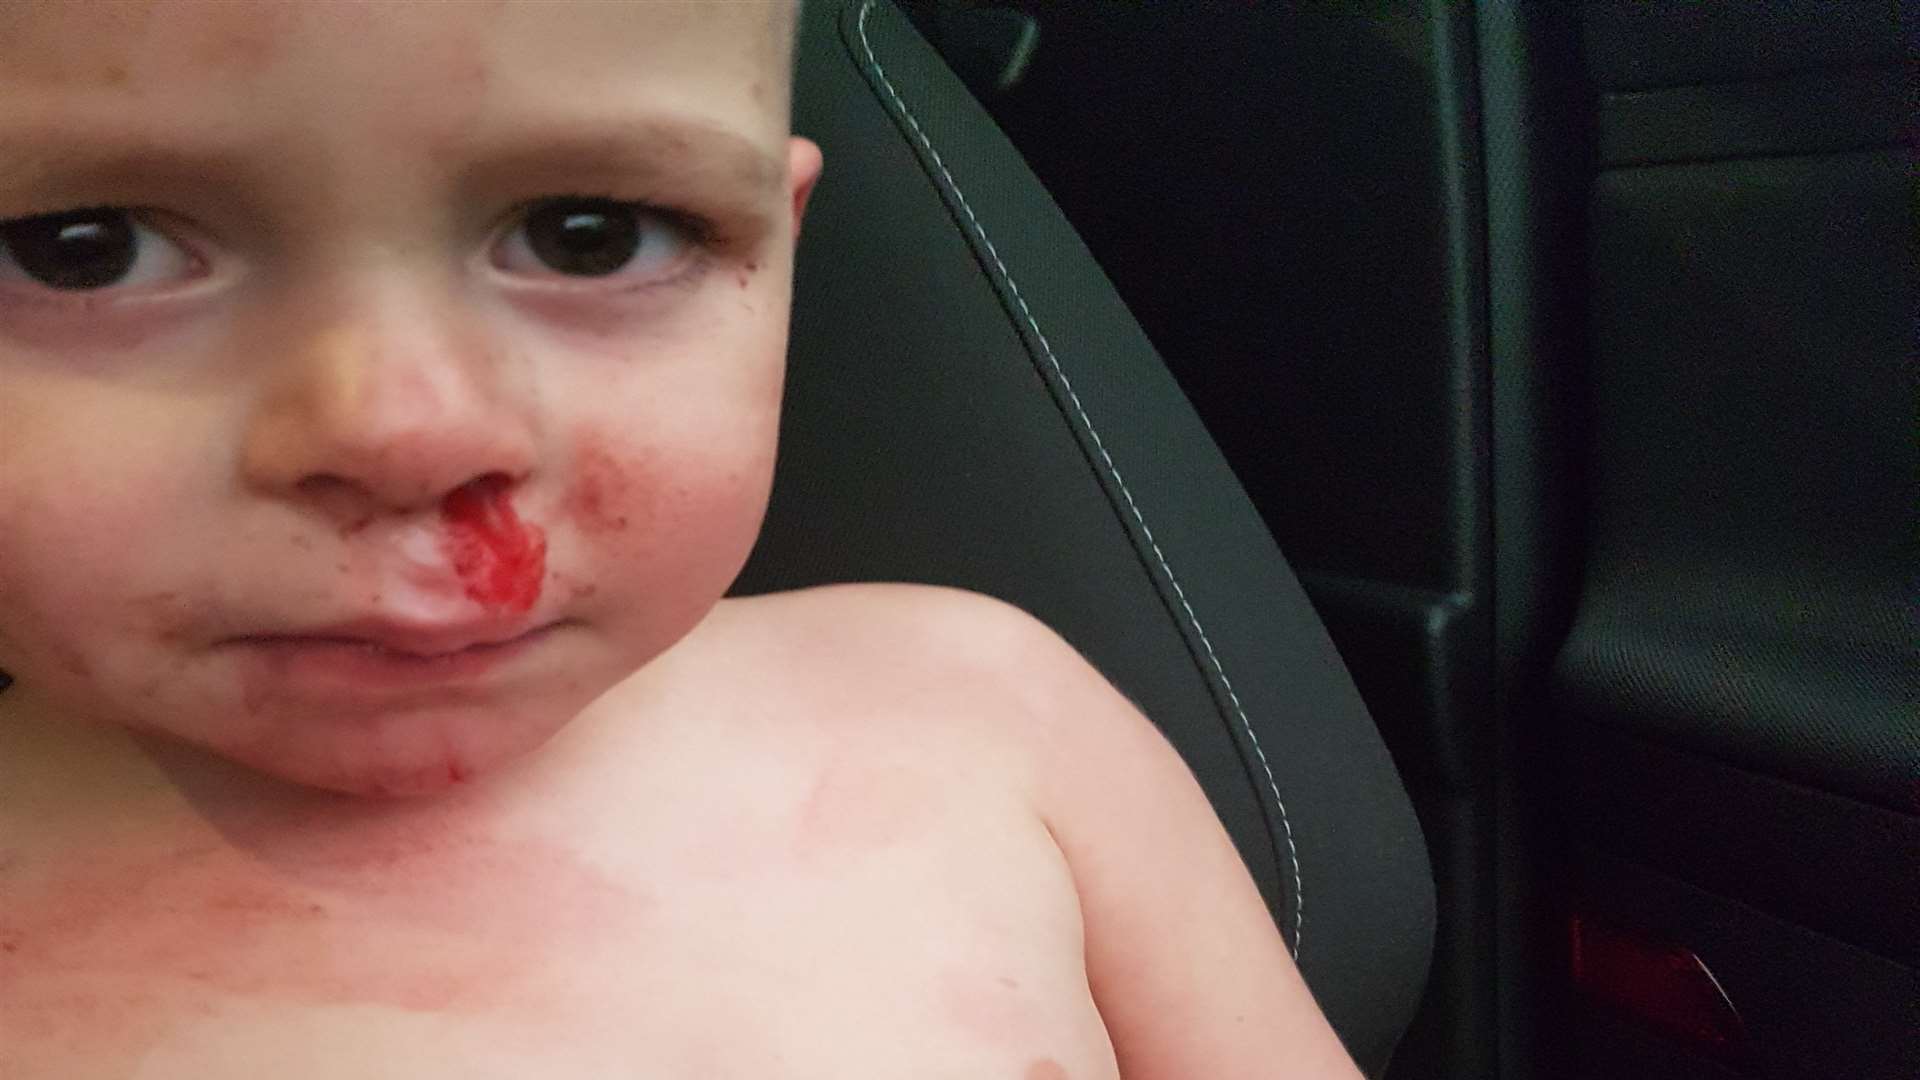 Tommy O'Brien,two, suffered a bloodied nose after the accident in the supermarket